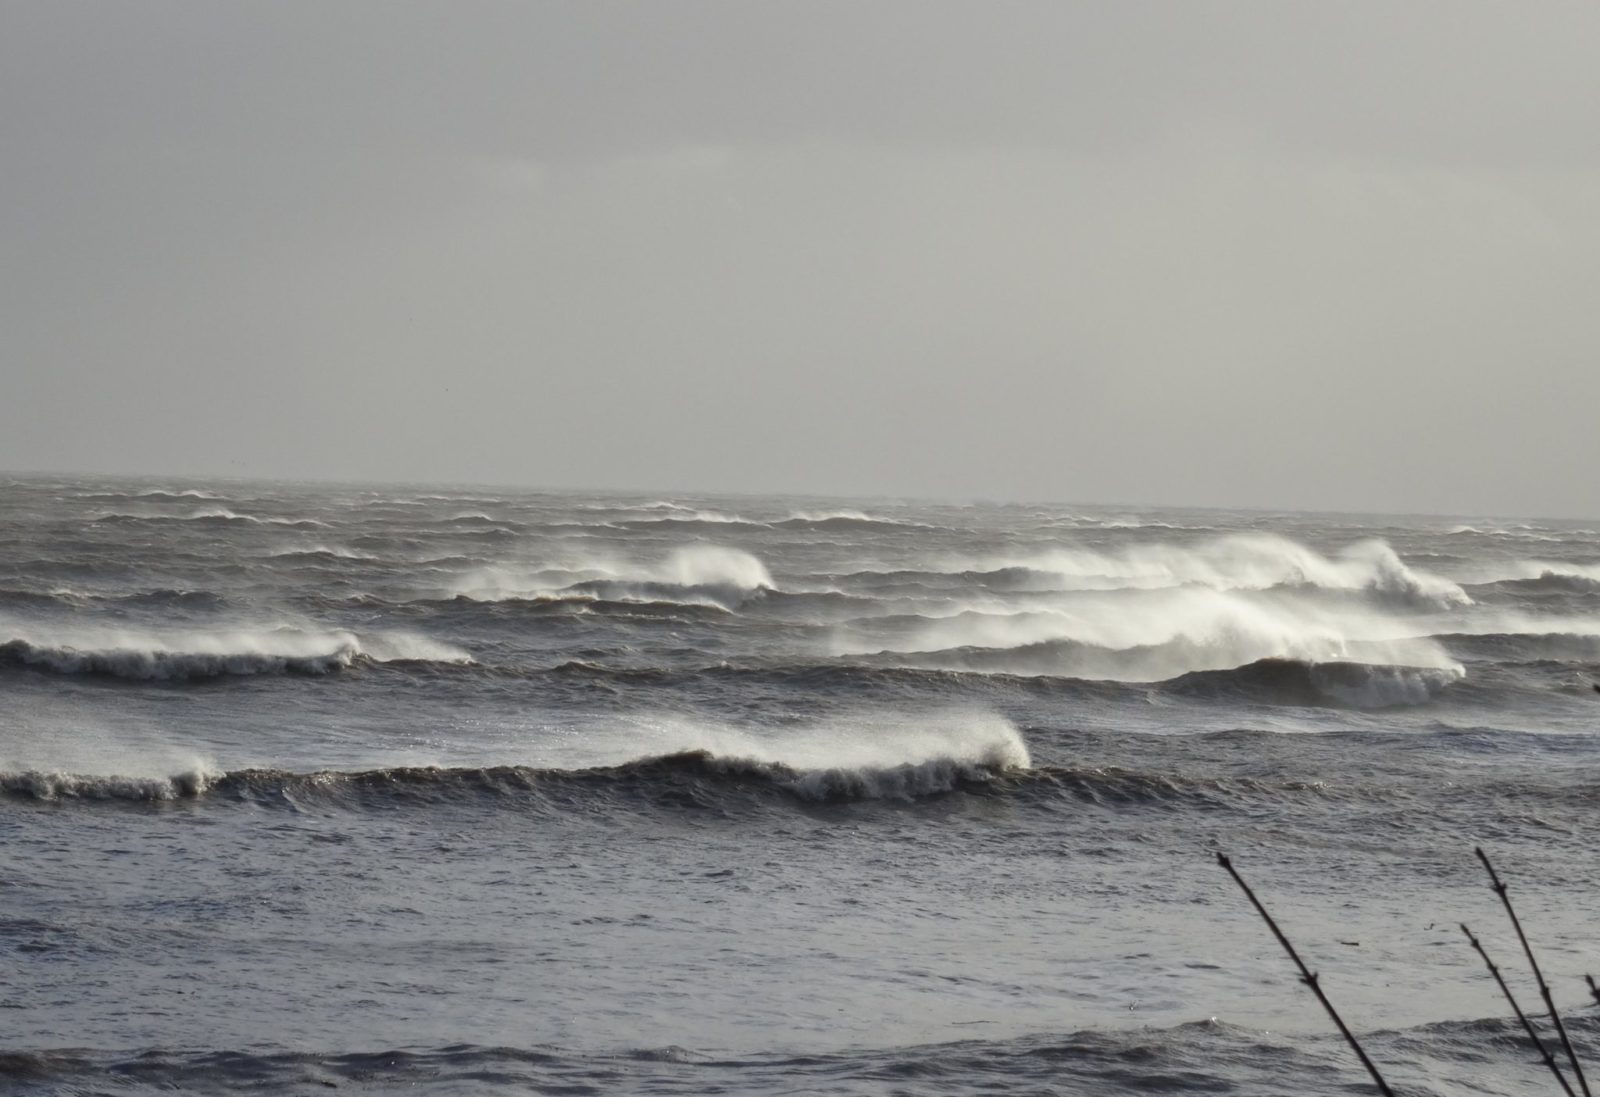 A Wild Day in Morecambe Bay